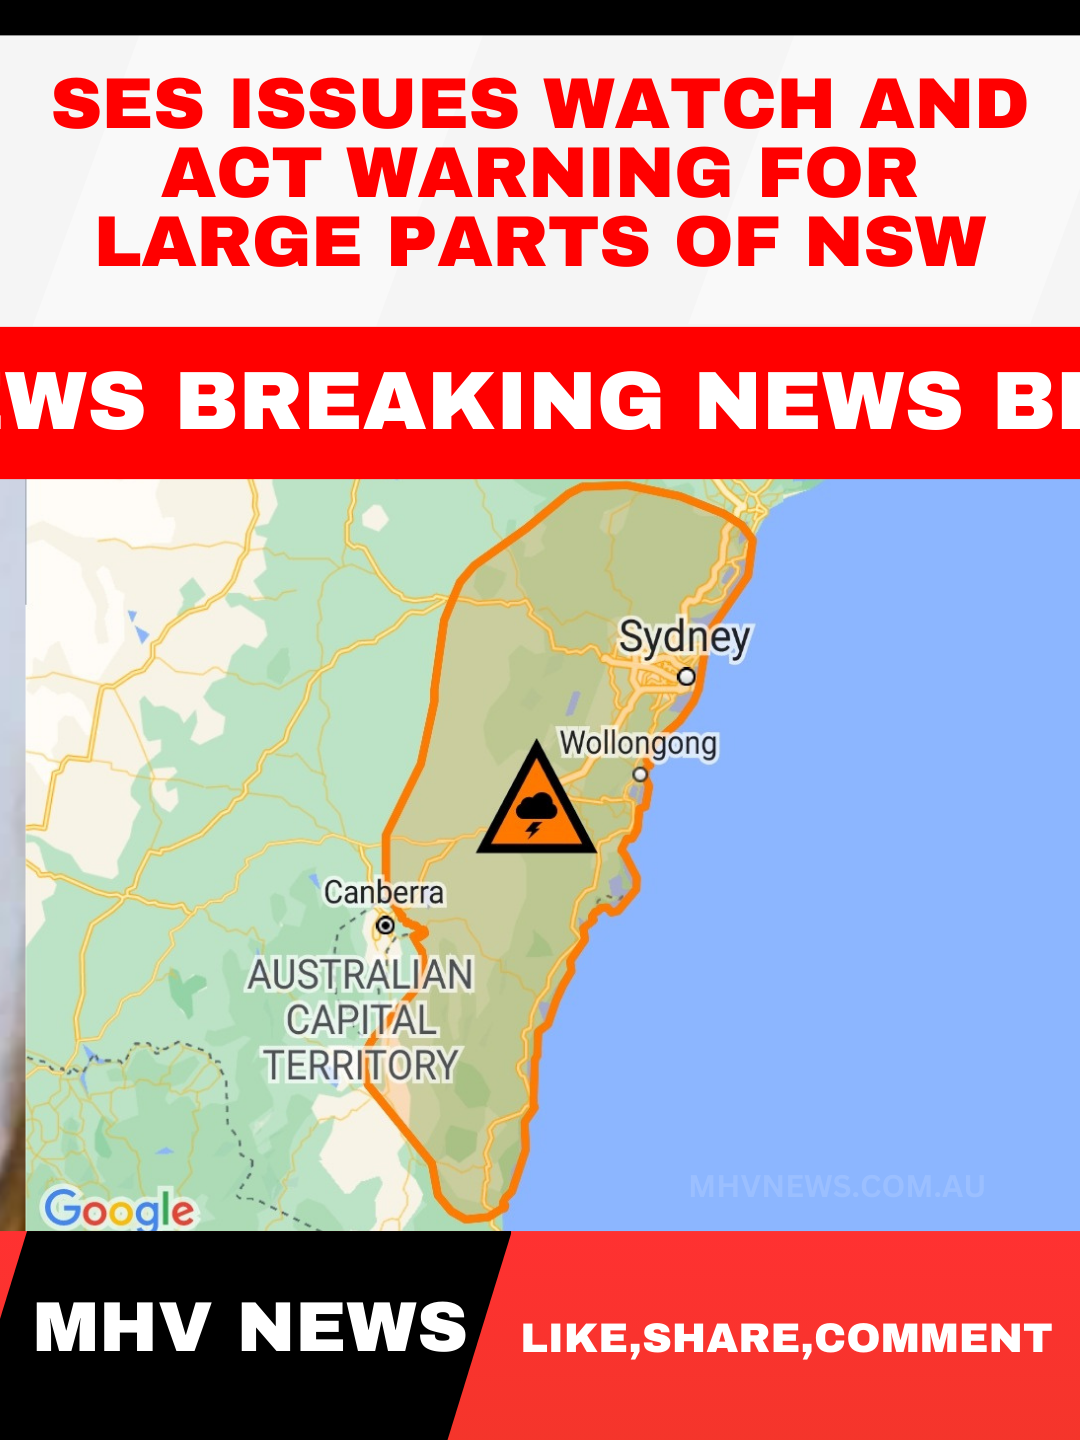 You are currently viewing SES ISSUES WATCH AND ACT WARNING FOR LARGE PARTS OF NSW